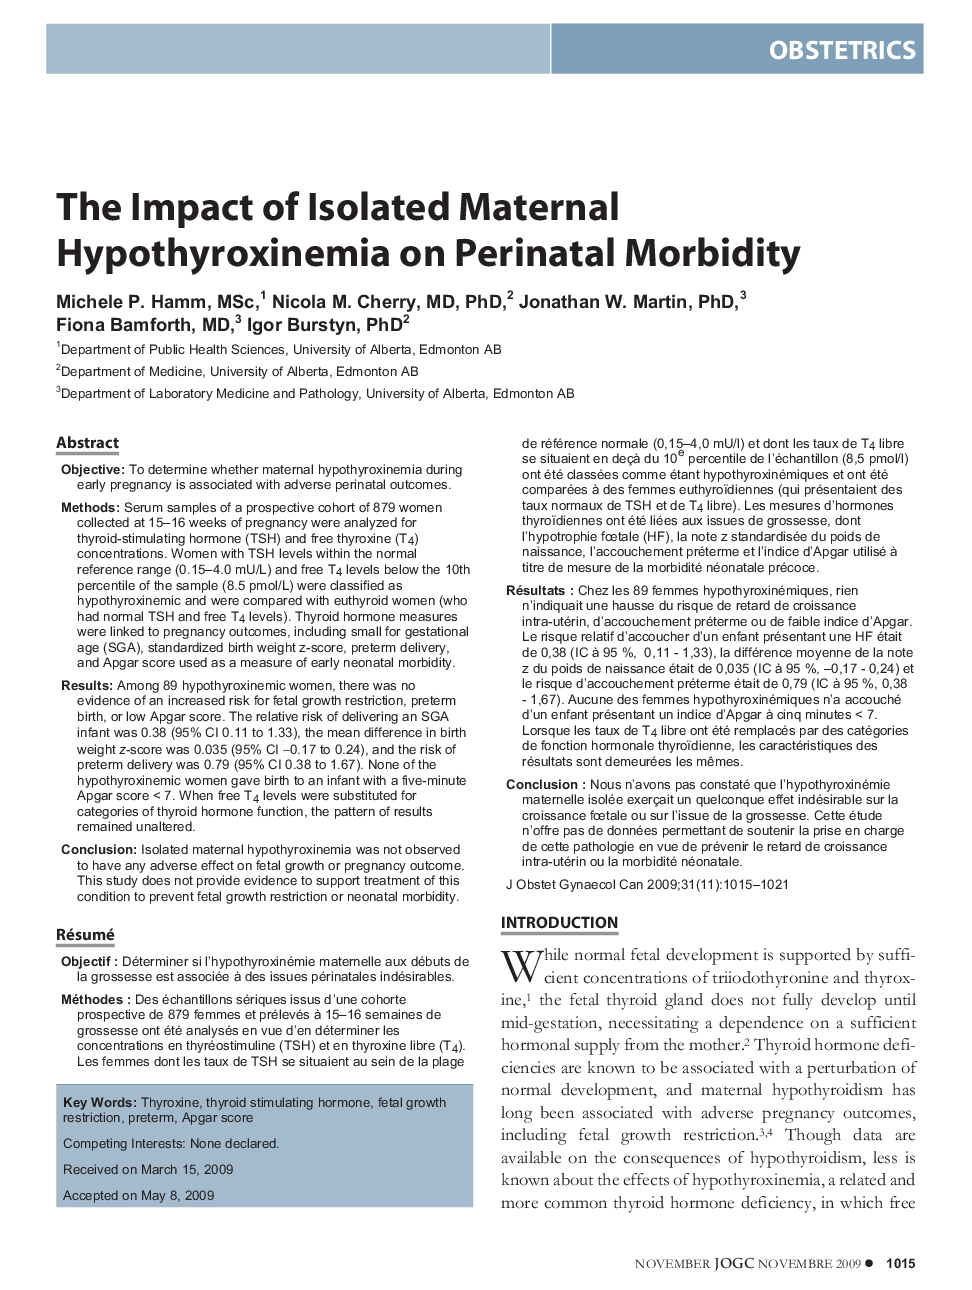 The Impact of Isolated Maternal Hypothyroxinemia on Perinatal Morbidity